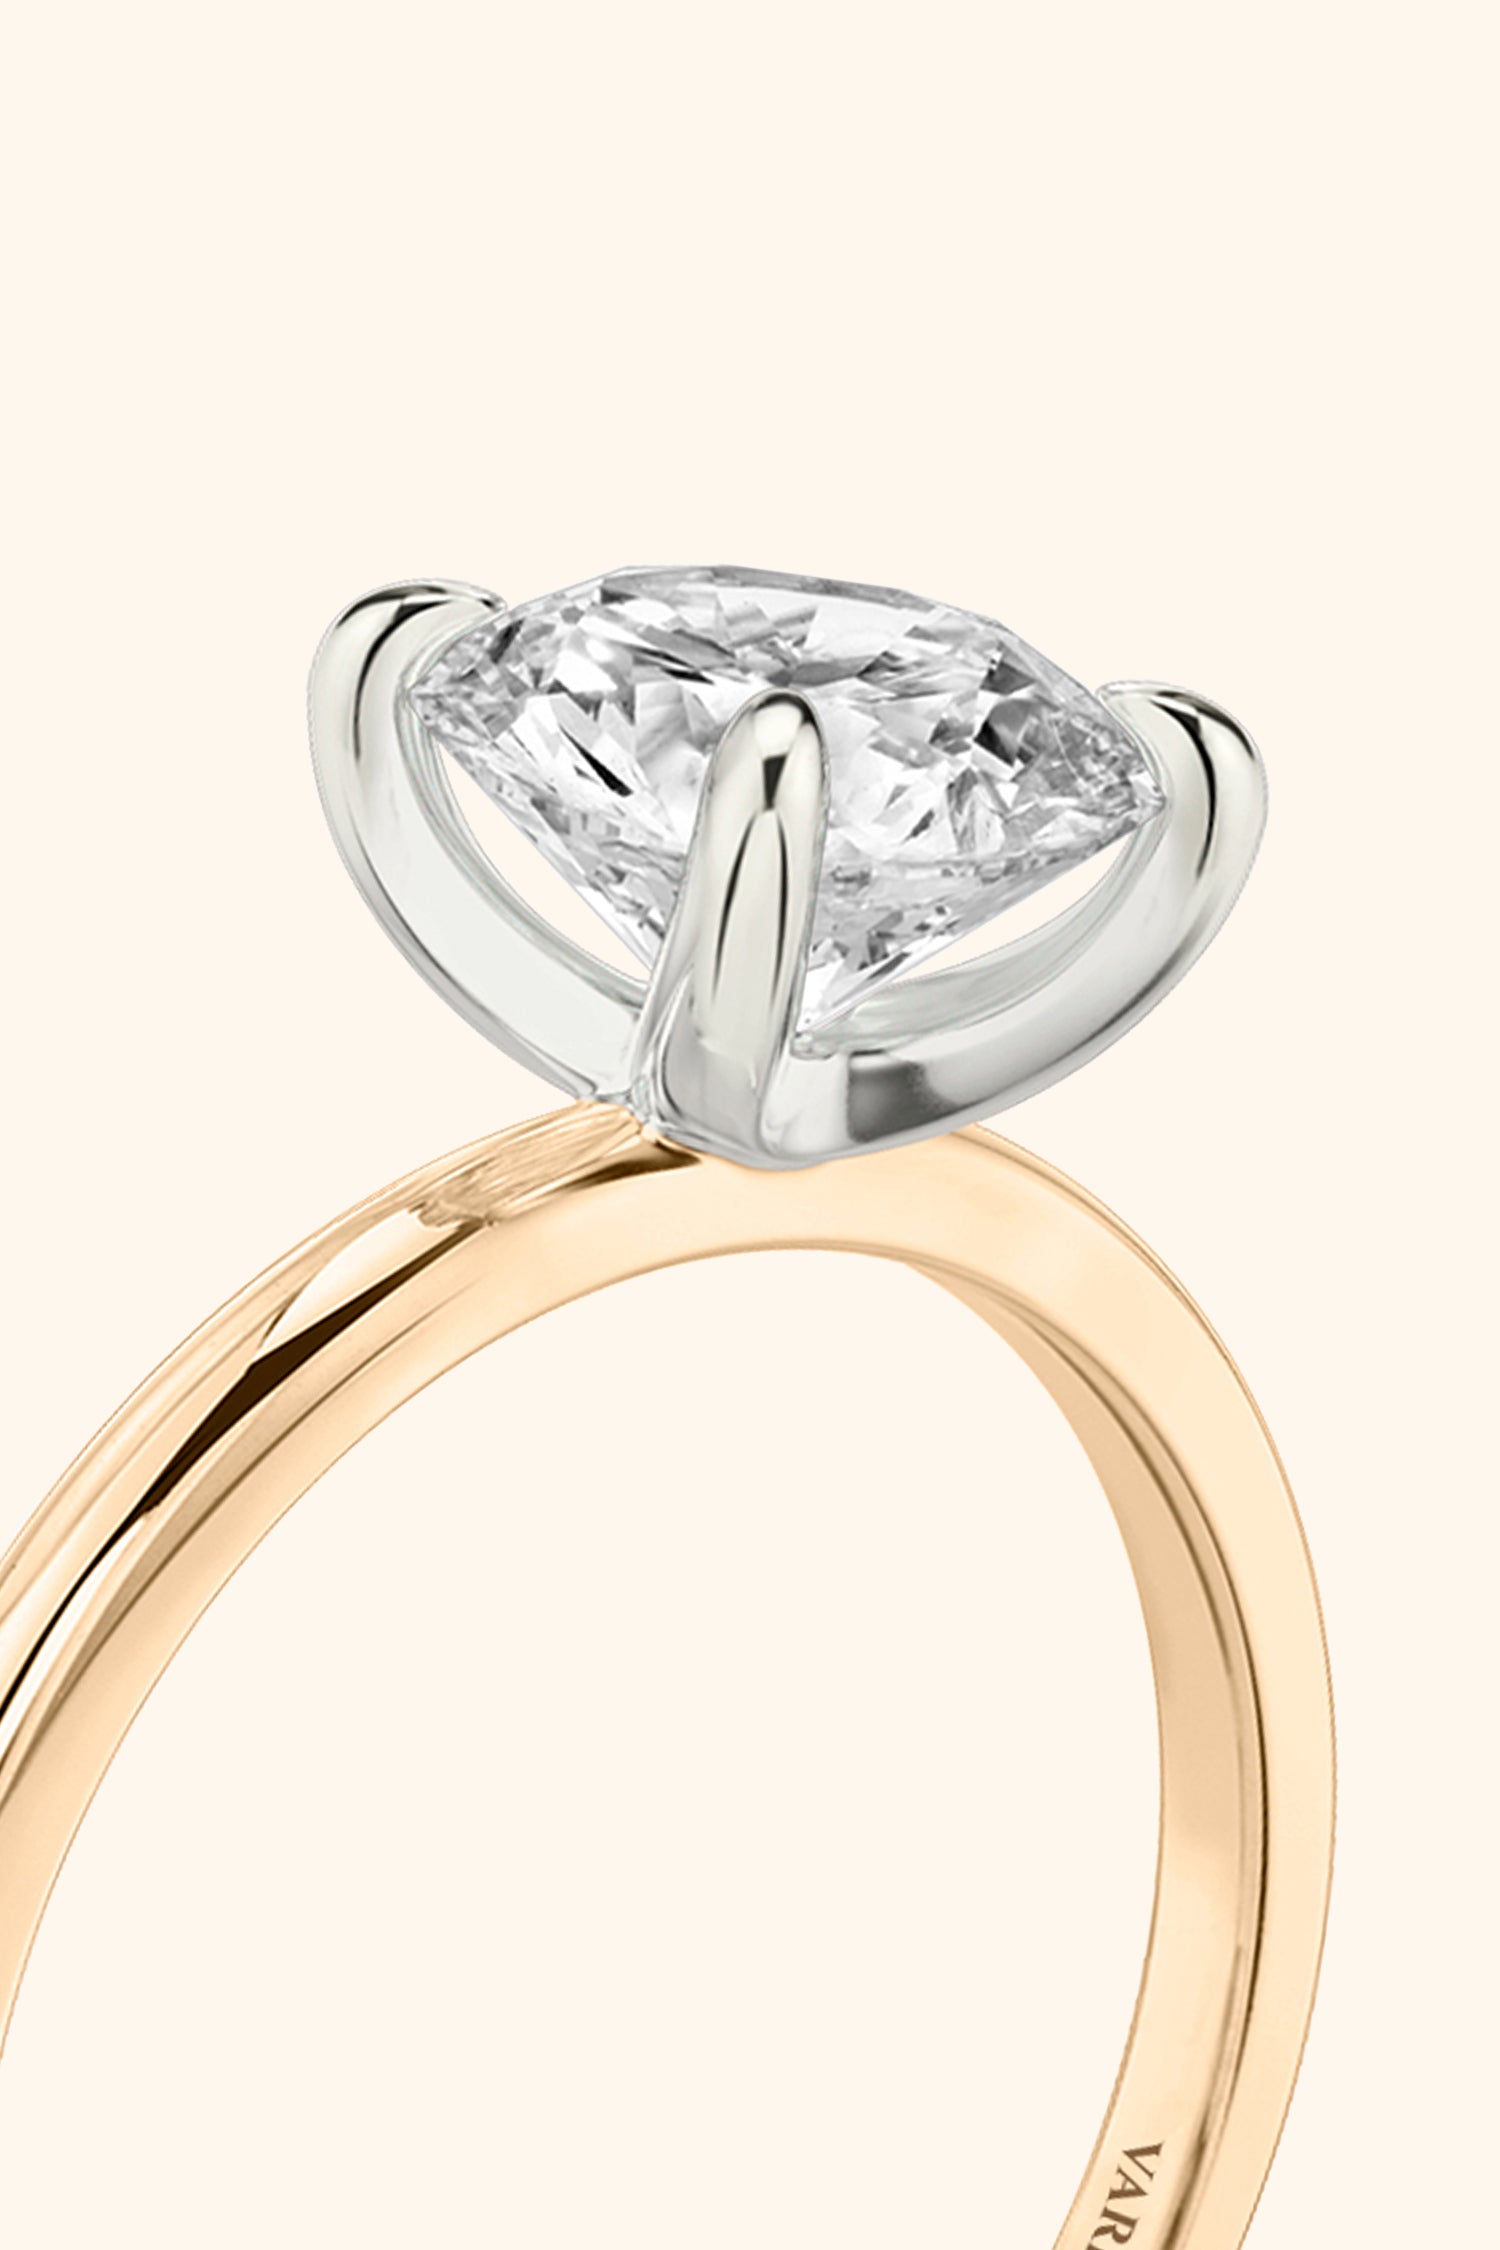 Dual Tone Glance Ring with Round Brilliant Solitaire.